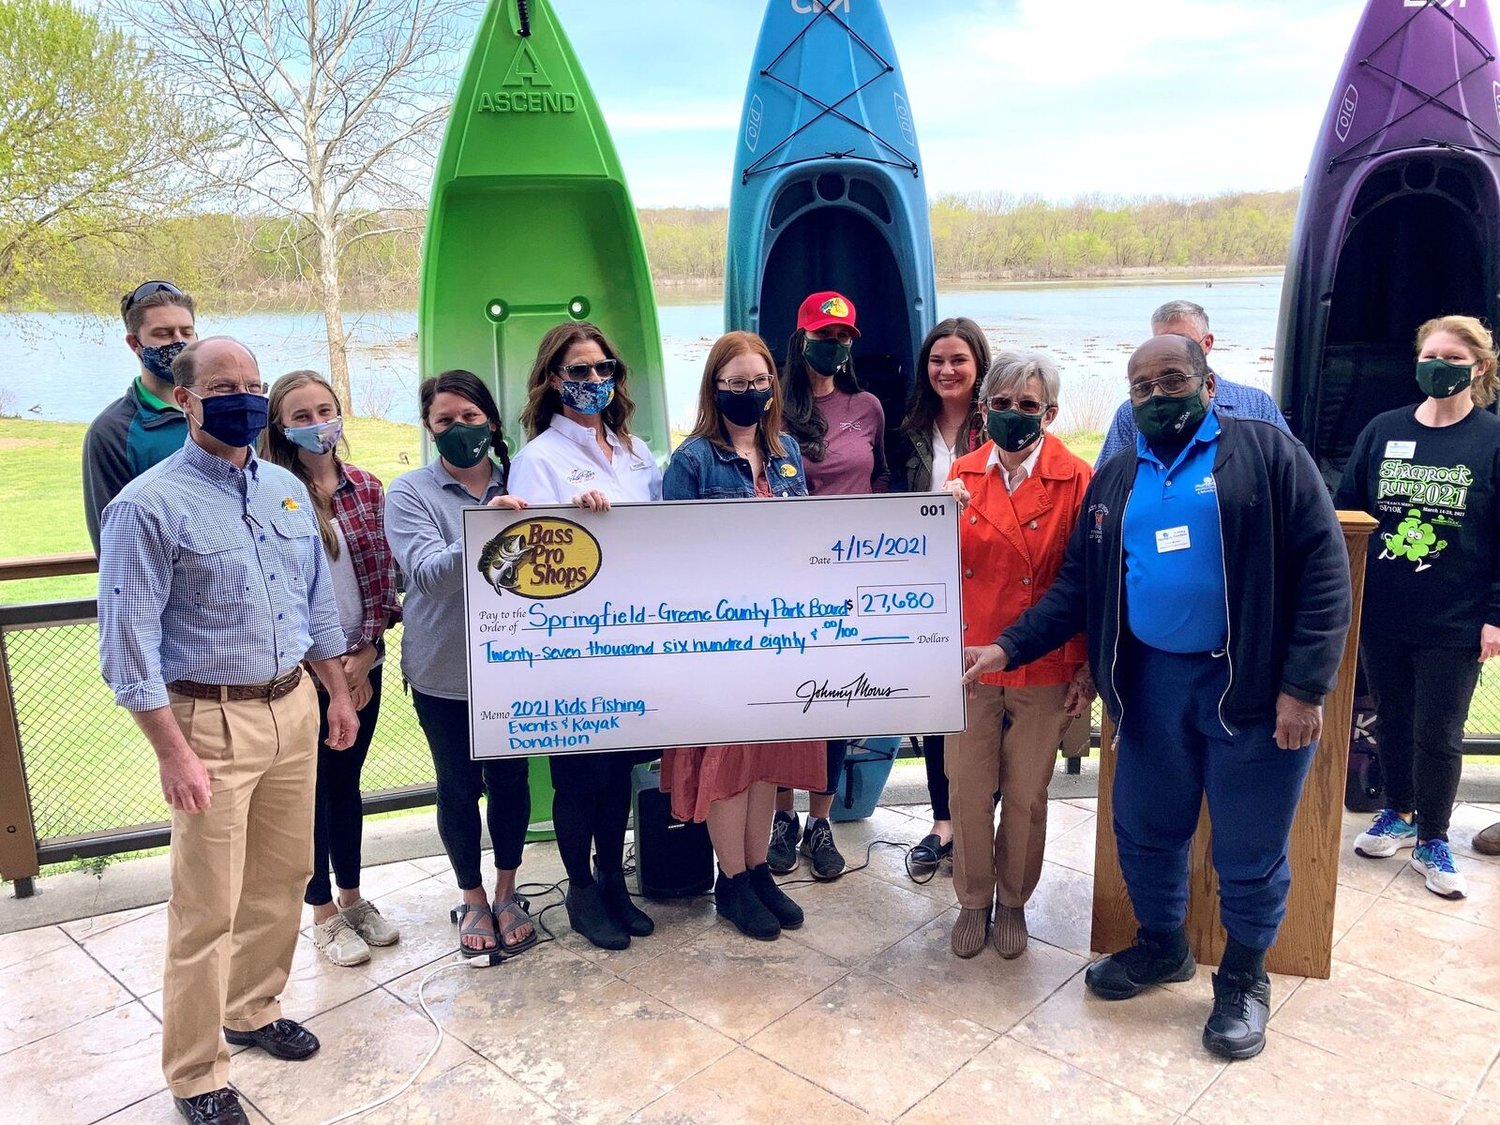 OUTDOOR GIVINGBass Pro Shops on April 15 presents a ceremonial $27,680 check to the Springfield-Greene County Park Board. The donation amount represents the cost of 40 new kayaks, paddles and life jackets given to the Park Board for use at Lake Springfield Park. The gear also will be used by the Park Board’s Outdoor Initiatives program for guiding paddling programs at area rivers and streams.